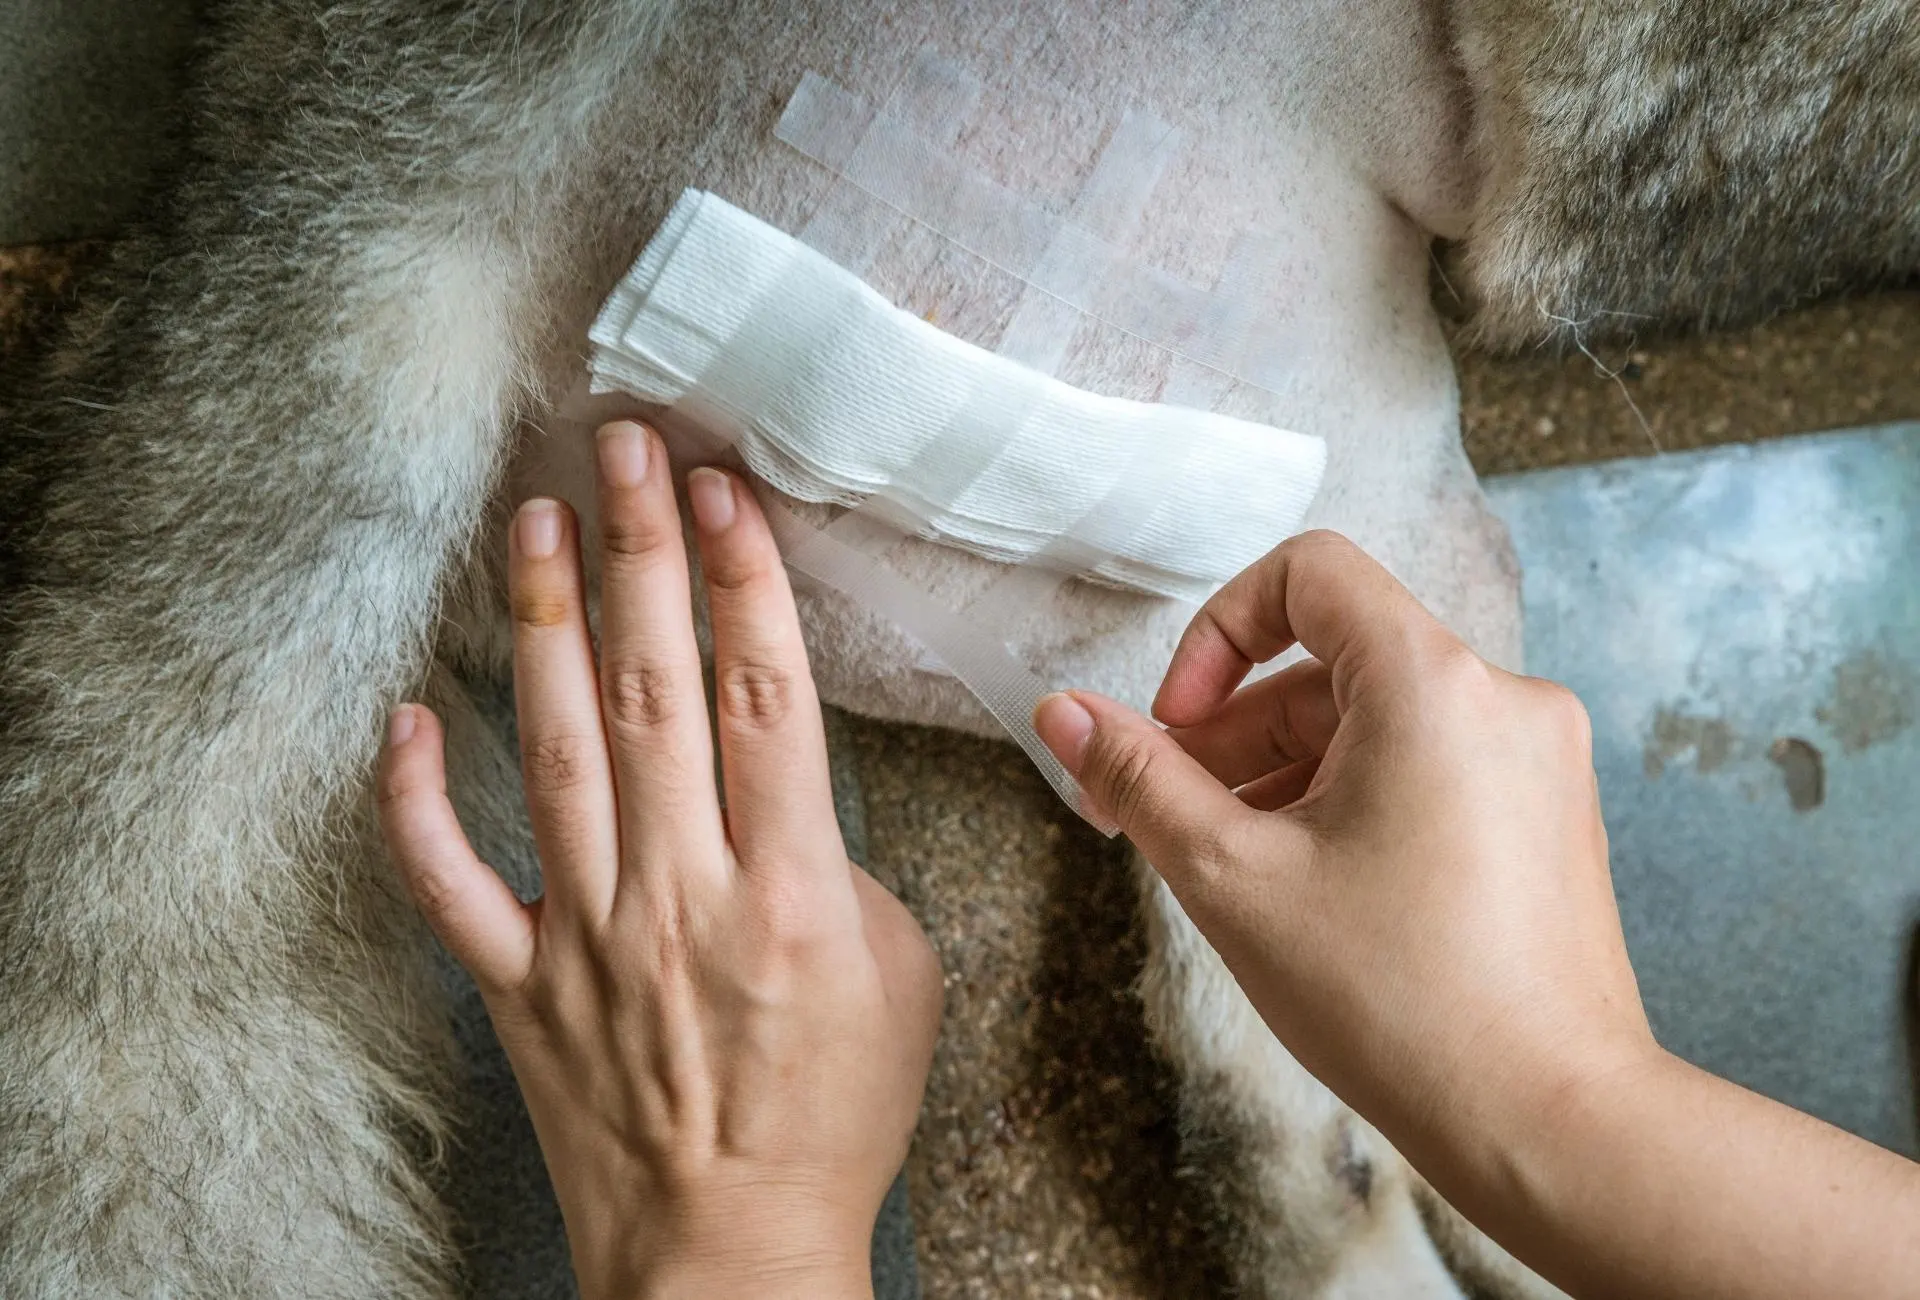 Gauze taped to a dog's wound.